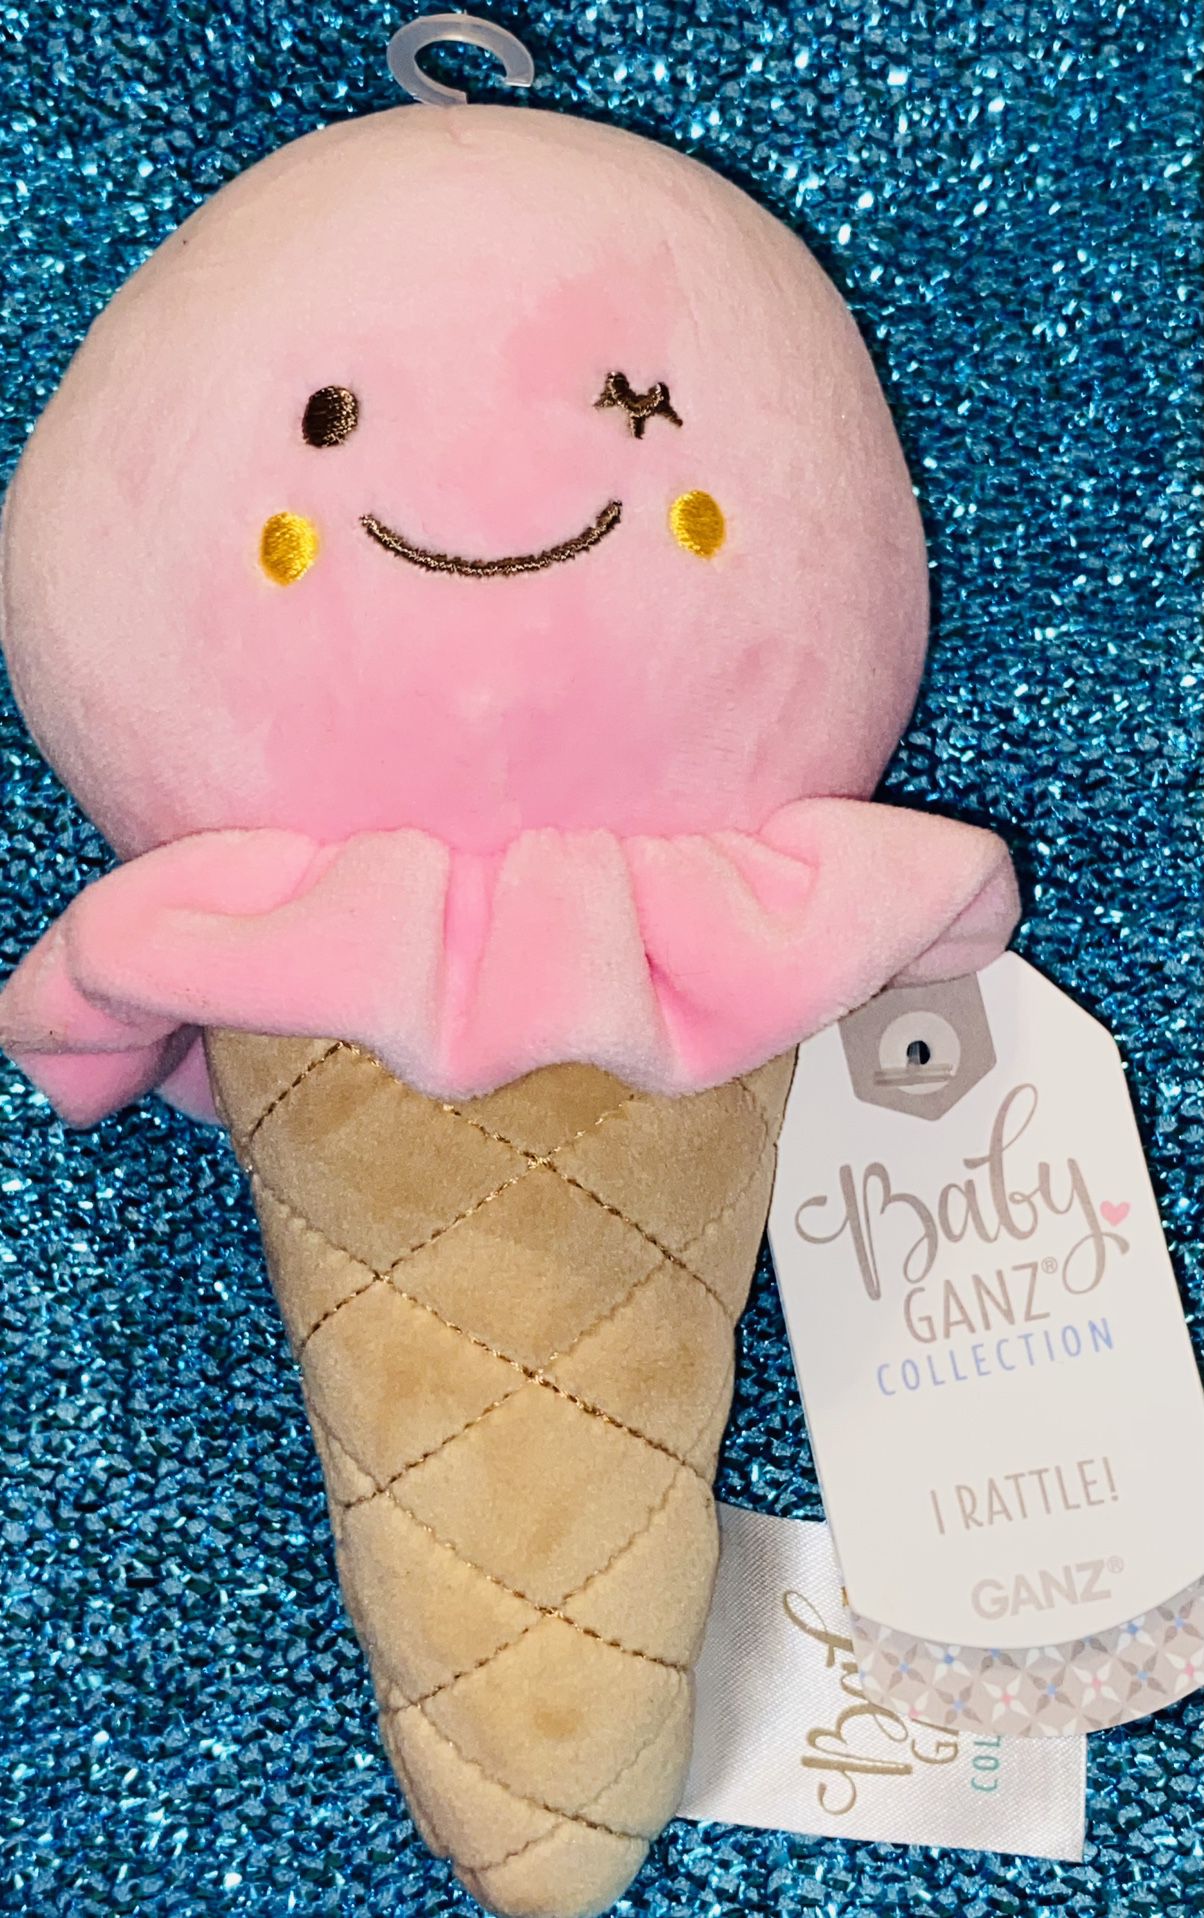 🌸🍼💕🎀🍦✨BABY GANZ COLLECTION! 1 RATTLE SWEET TREATS RATTLE (ICE CREAM)💕🍦🌸🍼🎀✨